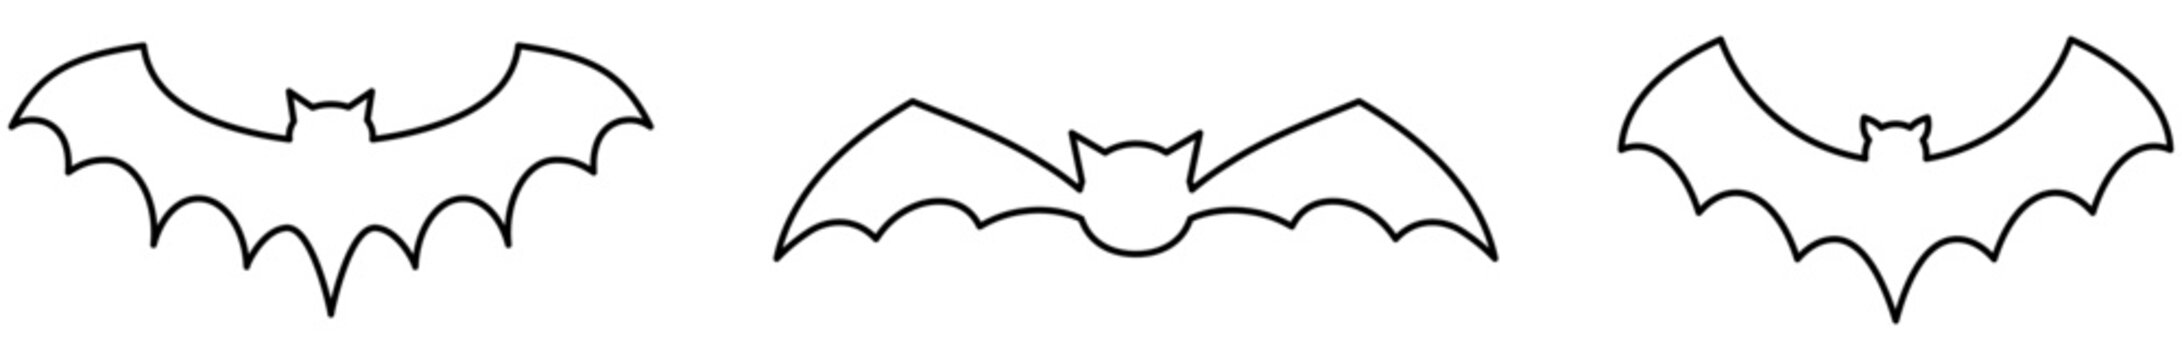 Outline bat icons. Vector illustration isolated on white background